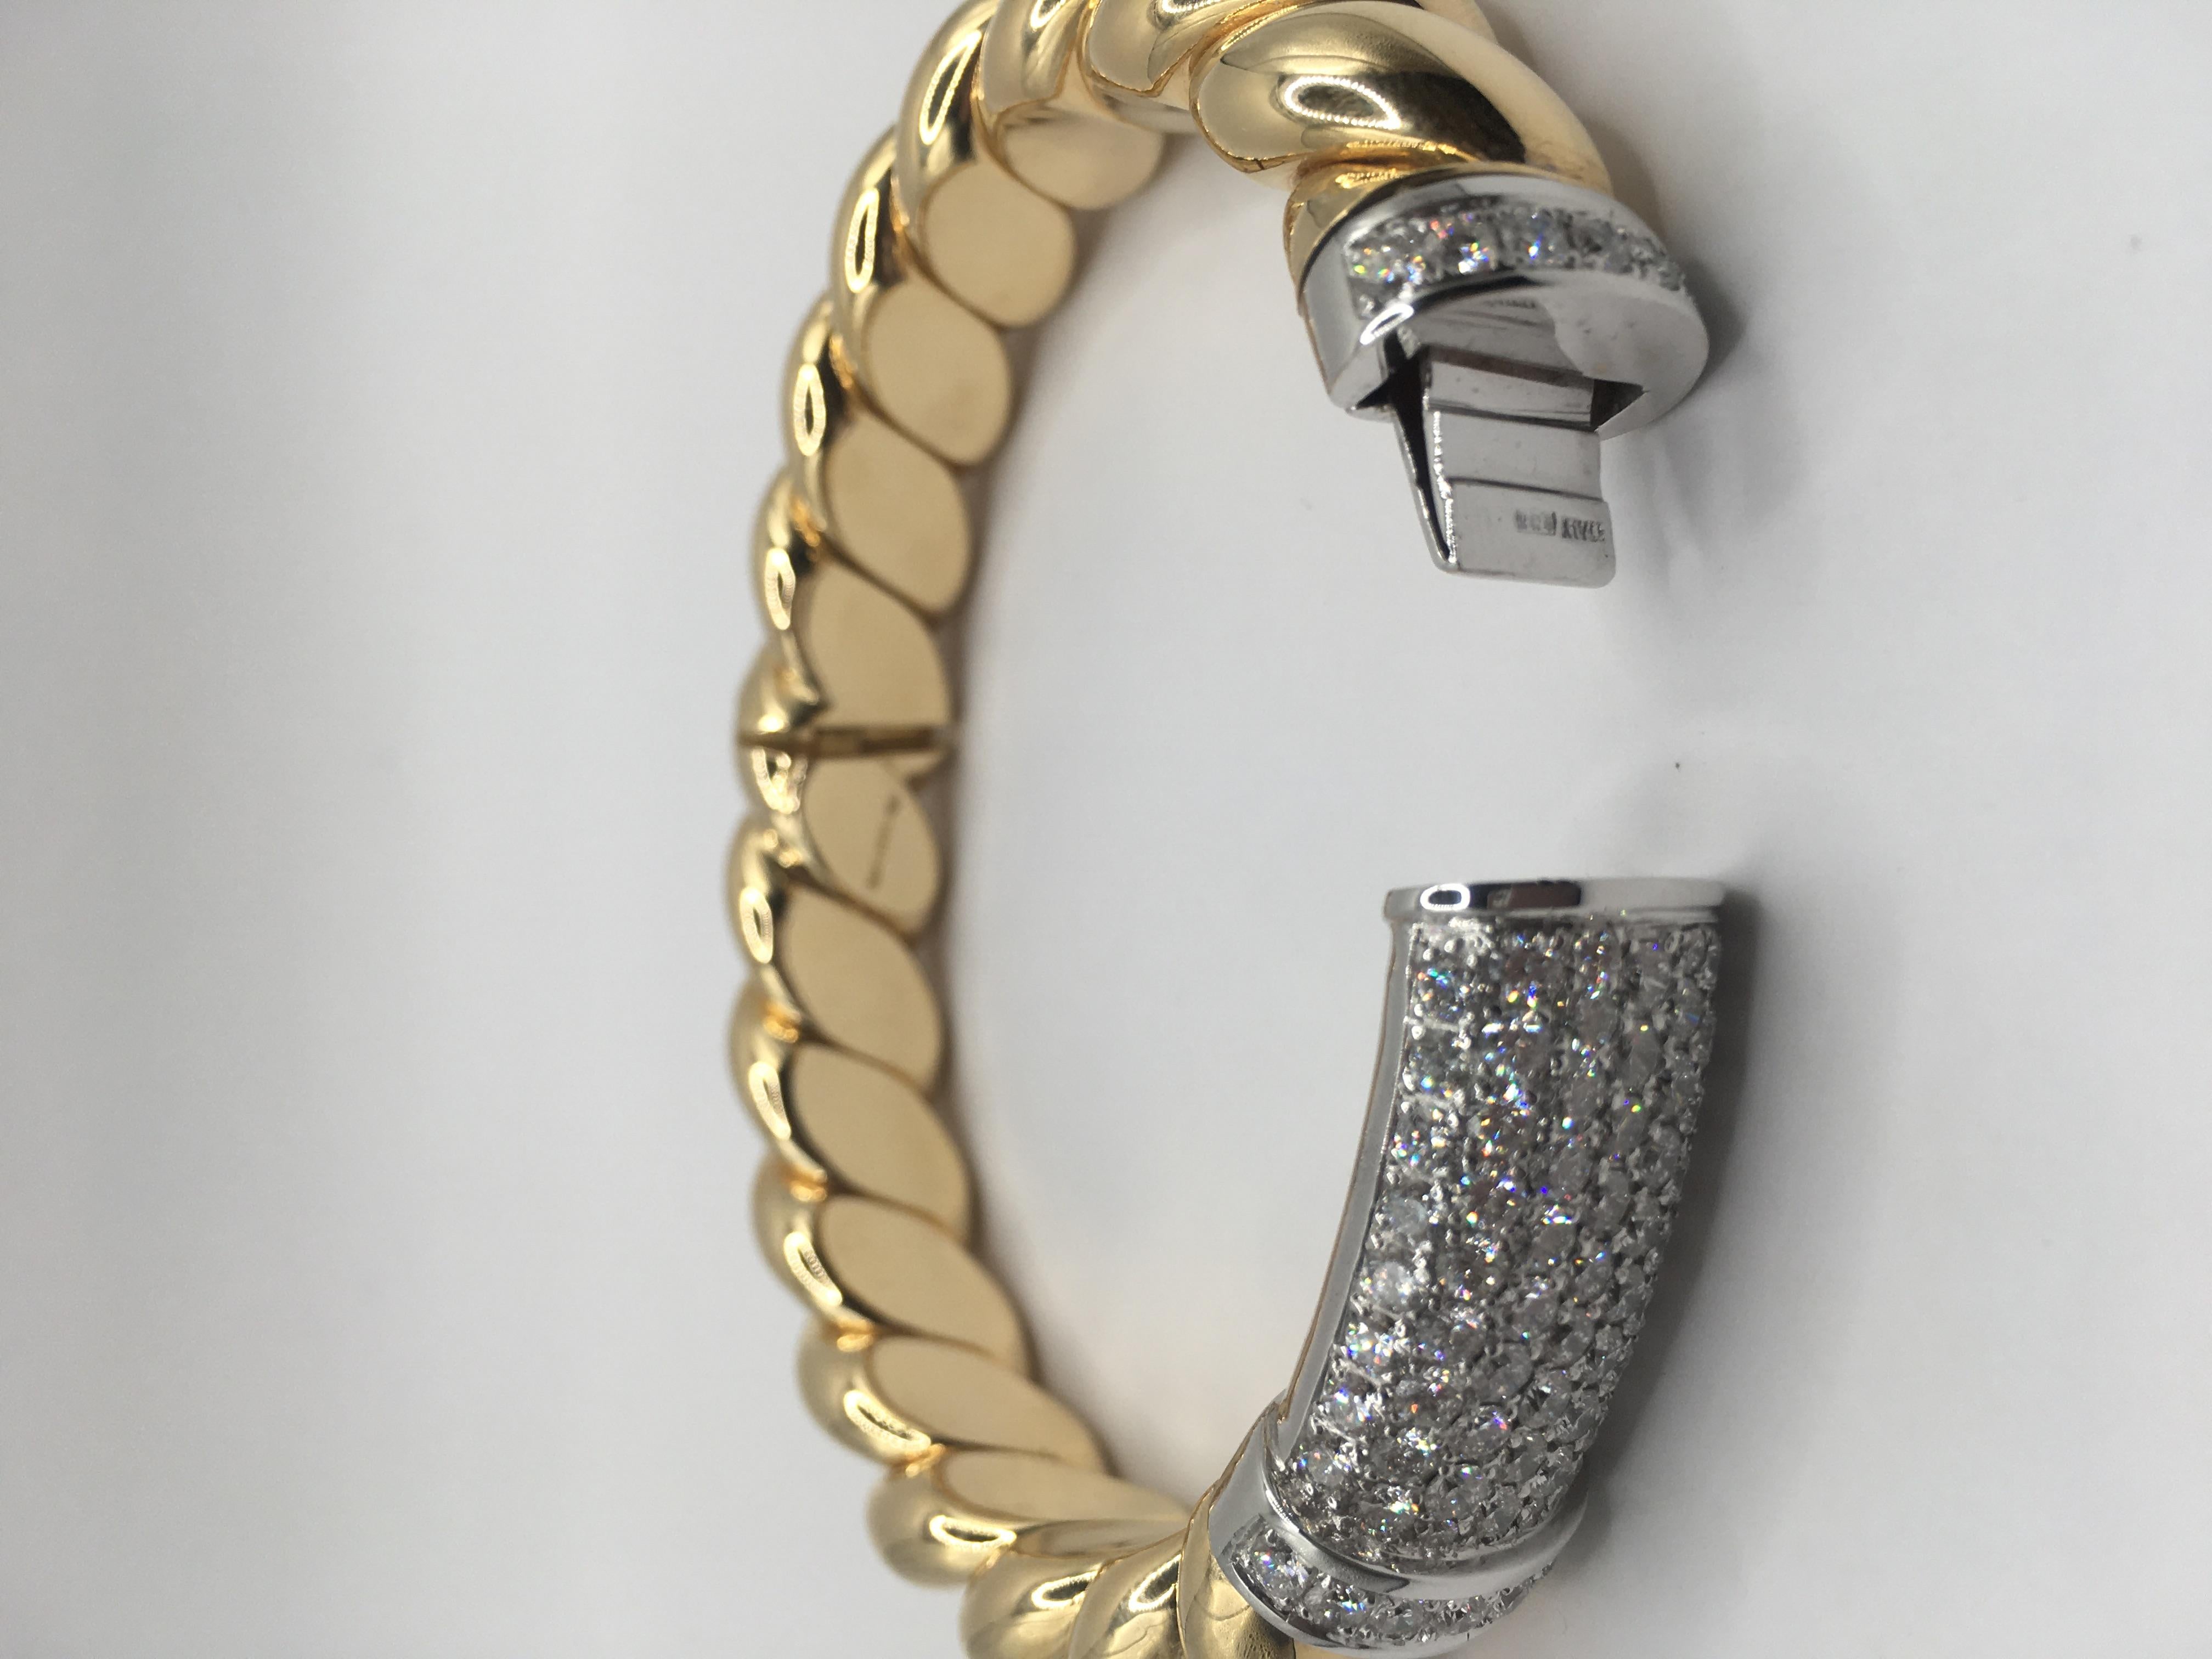 Rope bangle in 18 kt  yellow gold and white diamonds 
This is a traditional collection in Micheletto 

the total weight of the gold is  gr 65.50
the total weight of the white diamonds is ct 4.88 - color GH clarity VVS1

STAMP: 10 MI ITALY 750

The